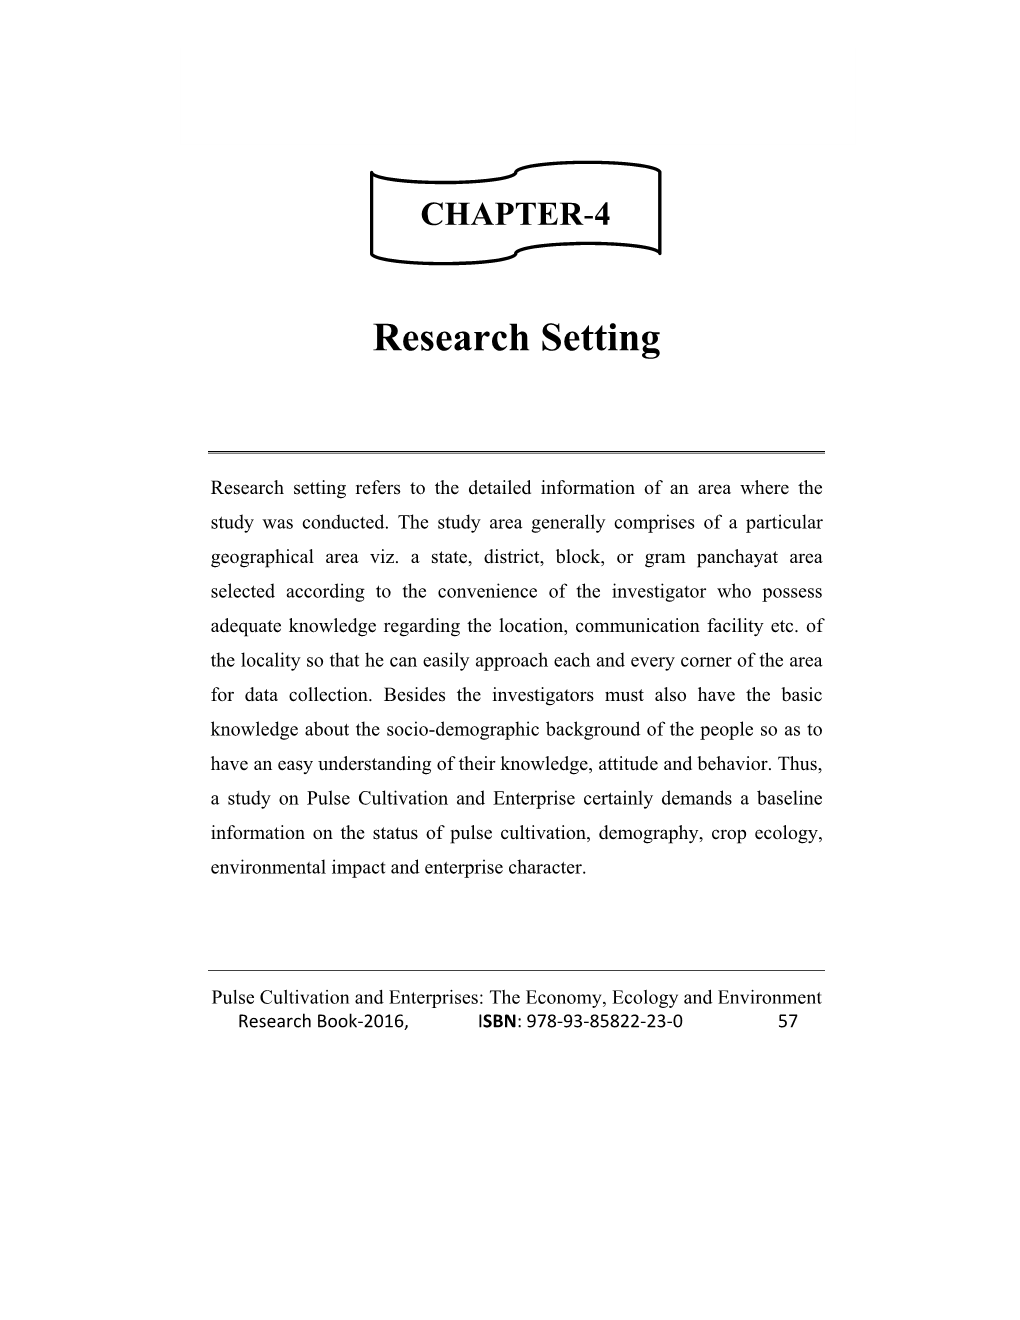 Research Setting